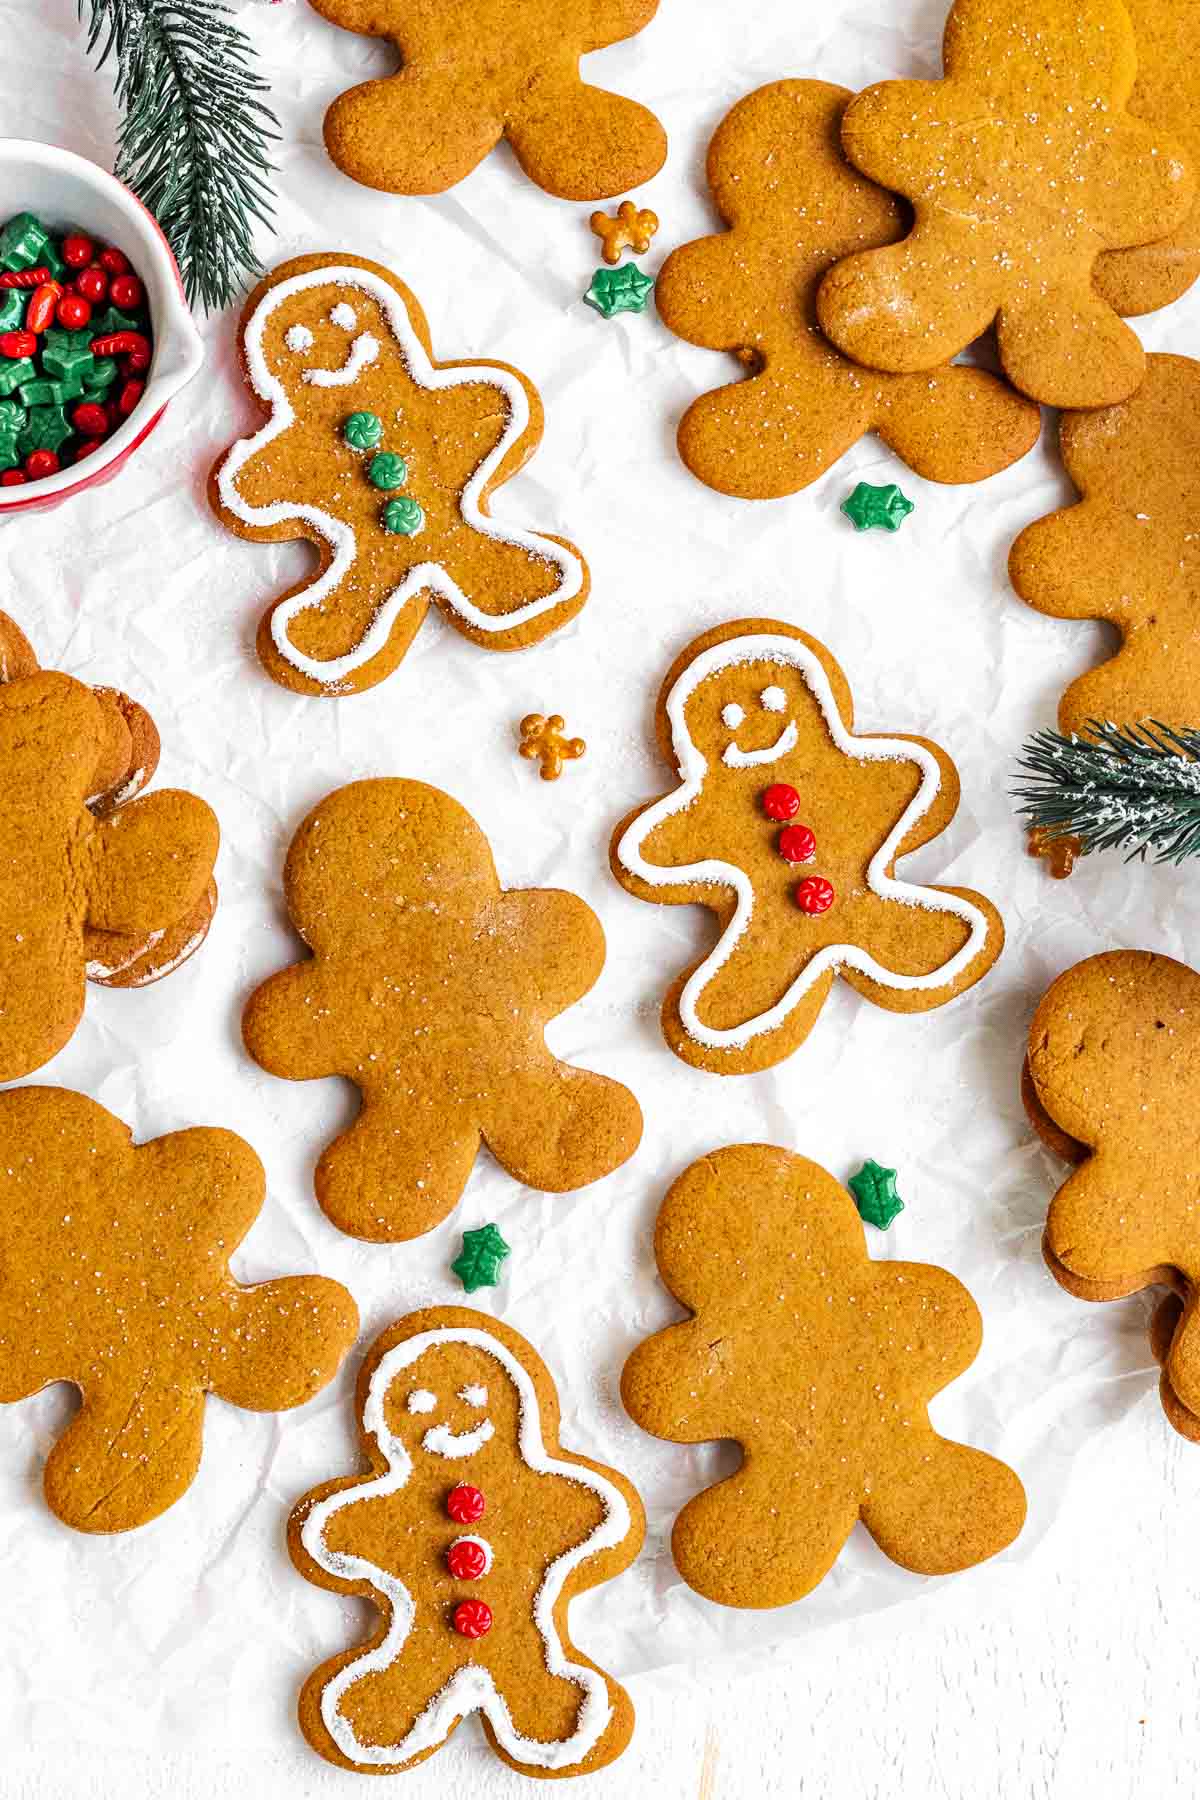 Gingerbread Men being decorated on top of white parchment paper.